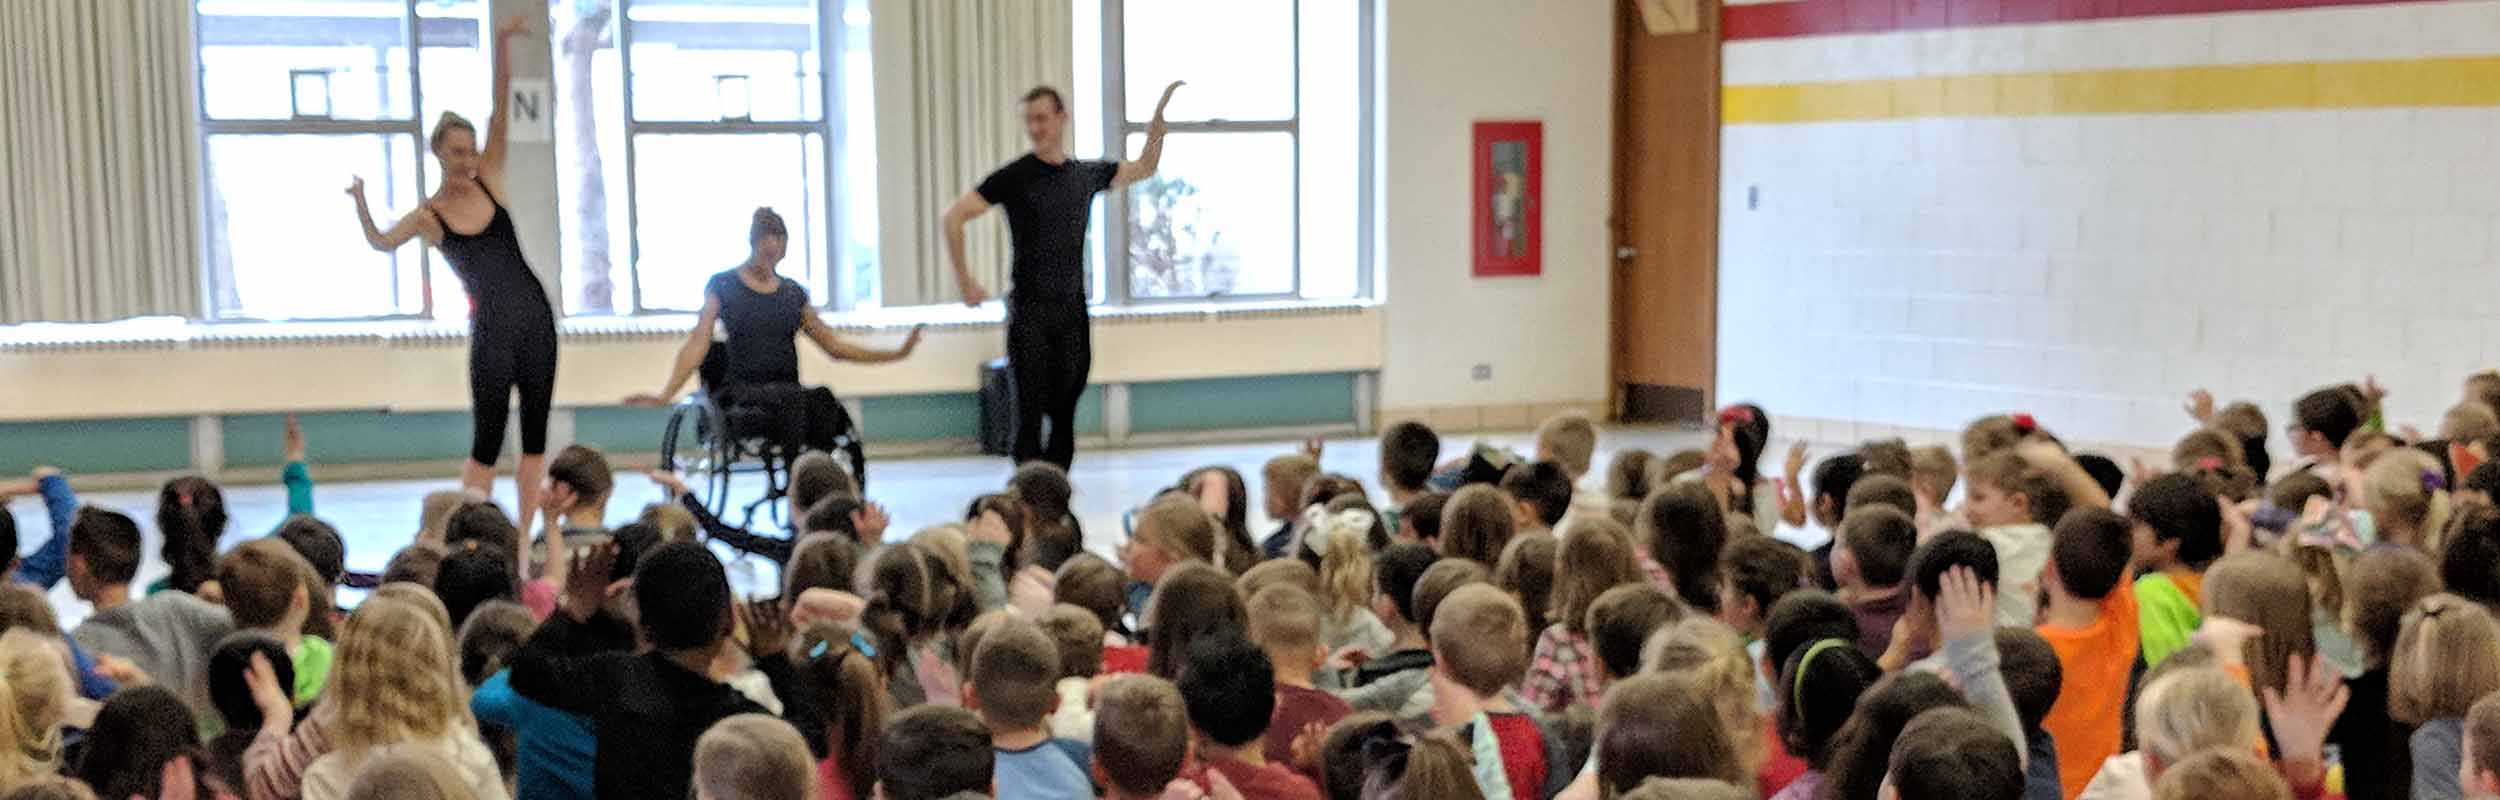 Three company dancers teach arm movements to a large audience of elementary school students in an assembly style lecture performance.